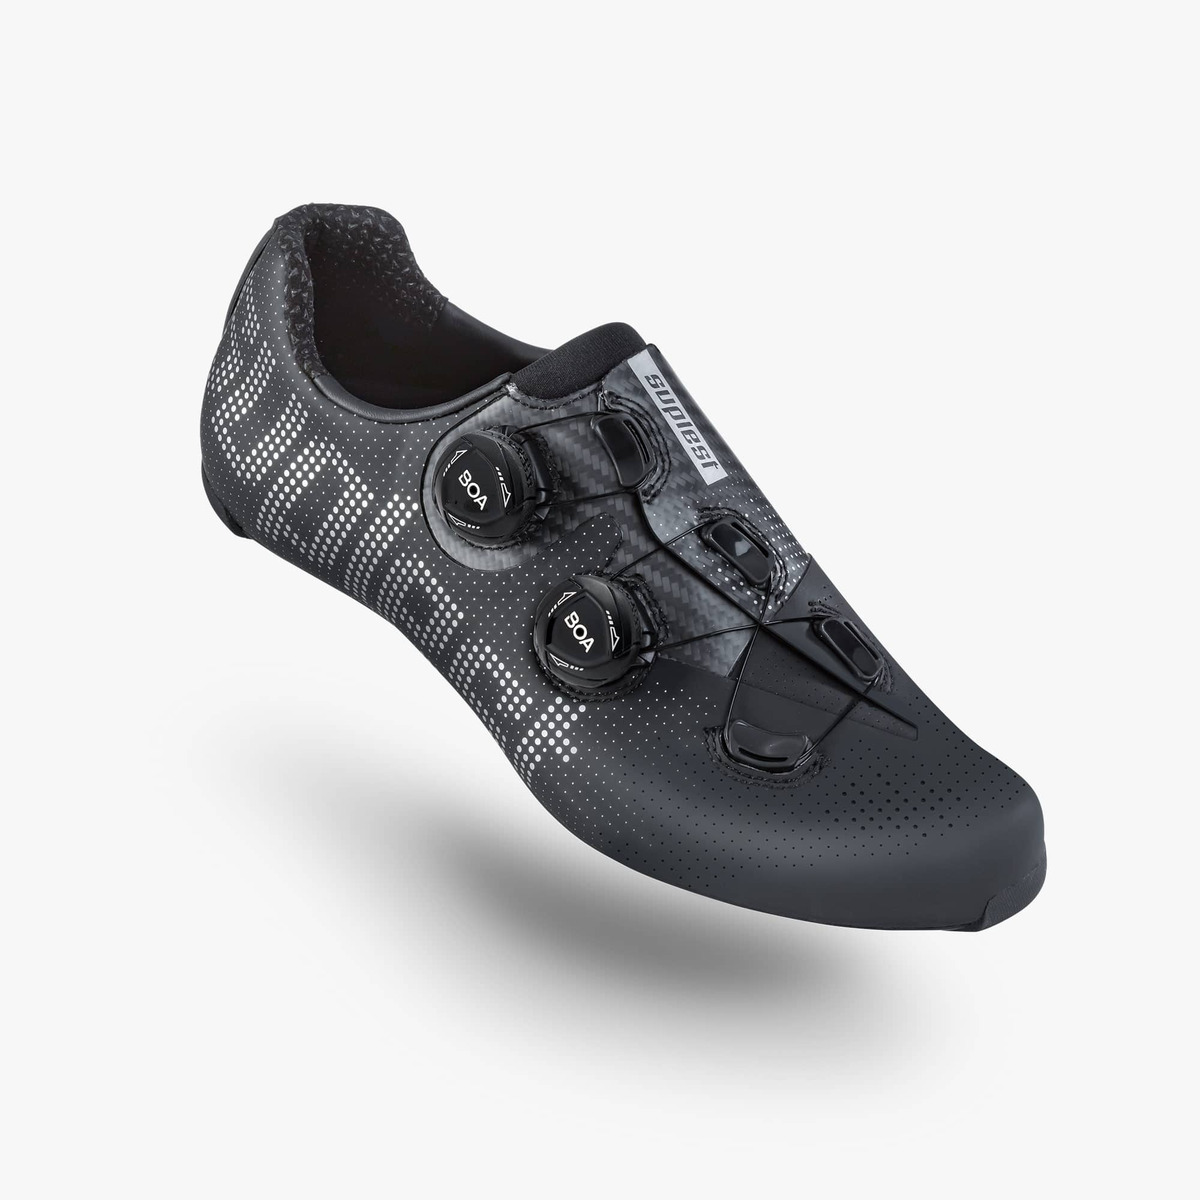 Suplest Road Pro EDGE | designed for high velocity and meets the demands of the world’s best racers | In 3 Colours limited sizes to clear.